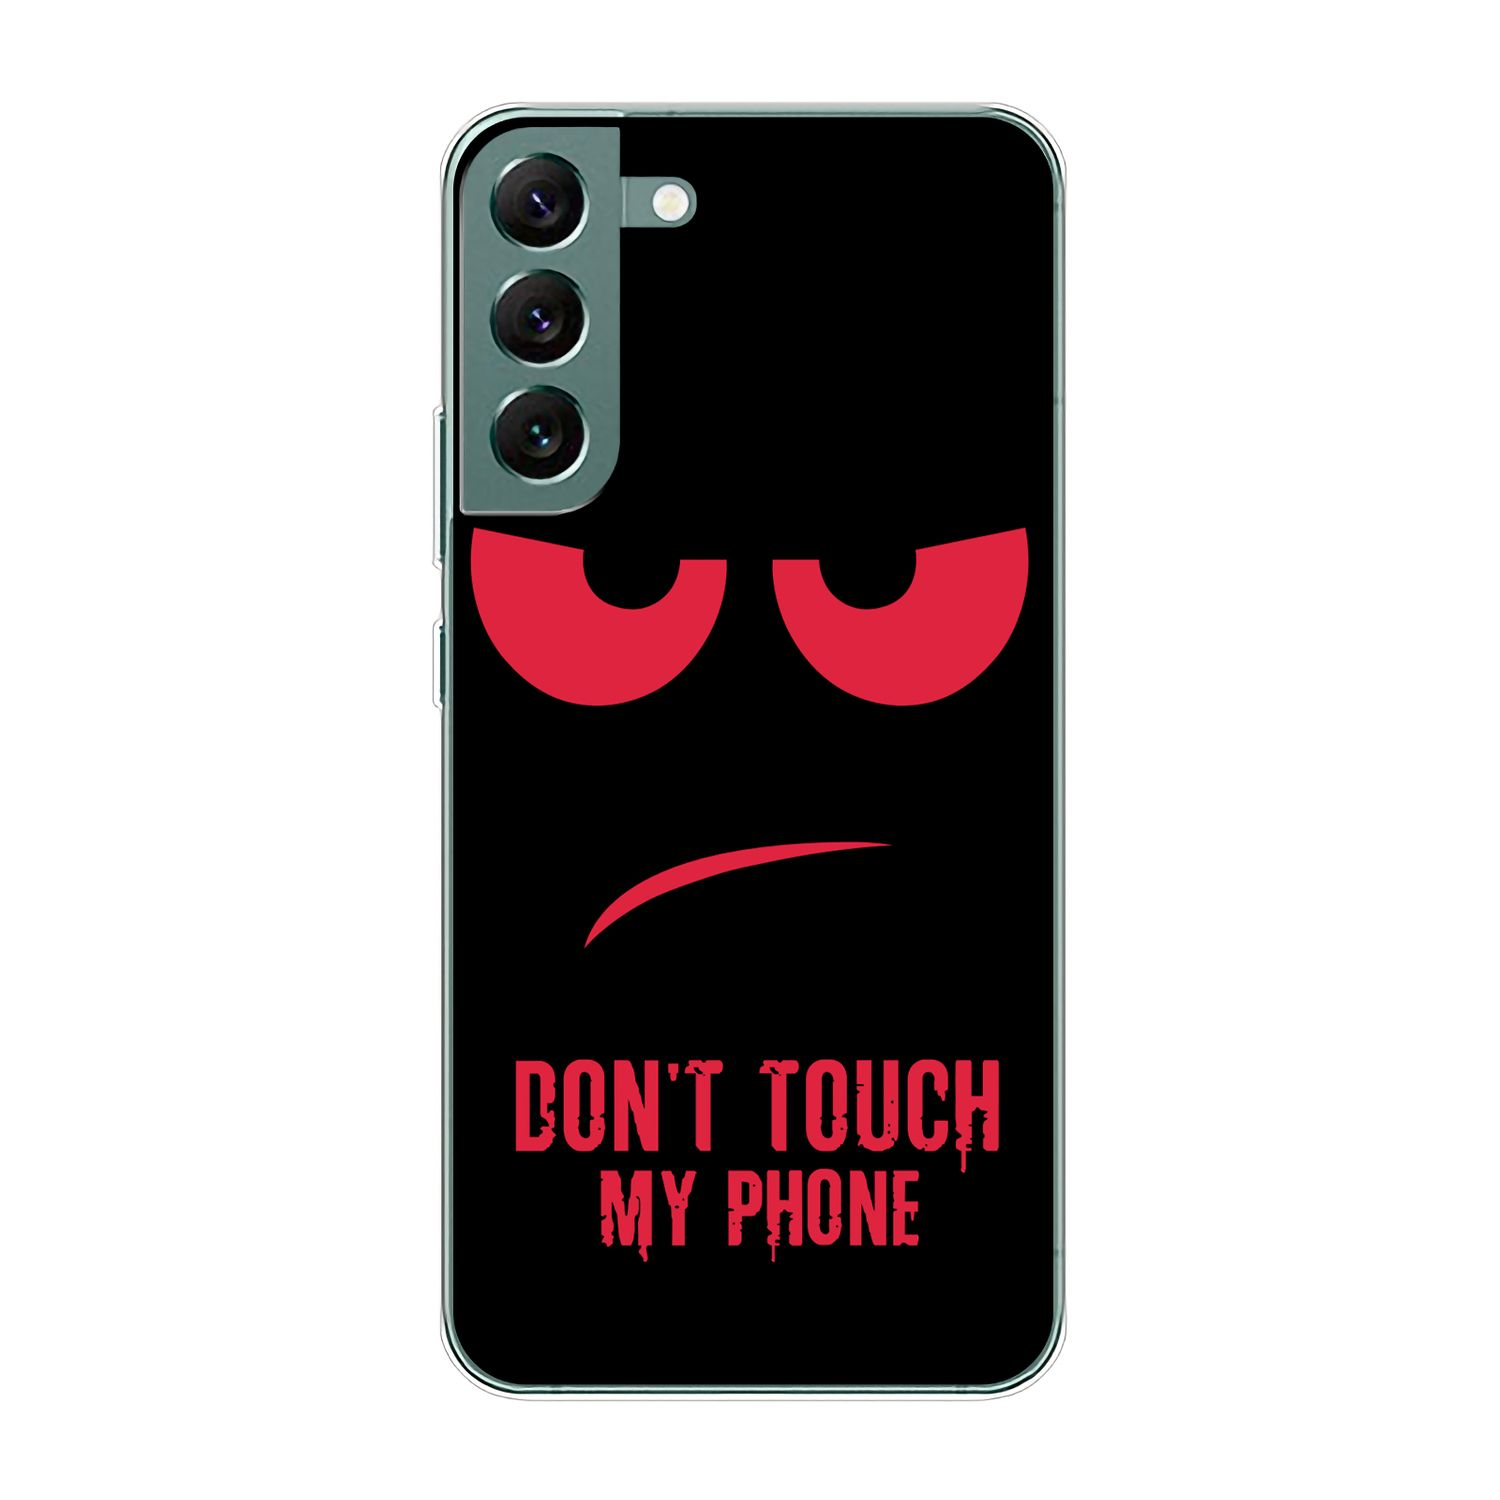 5G, Dont KÖNIG DESIGN Plus Rot S22 Backcover, Galaxy Phone Touch Case, Samsung, My